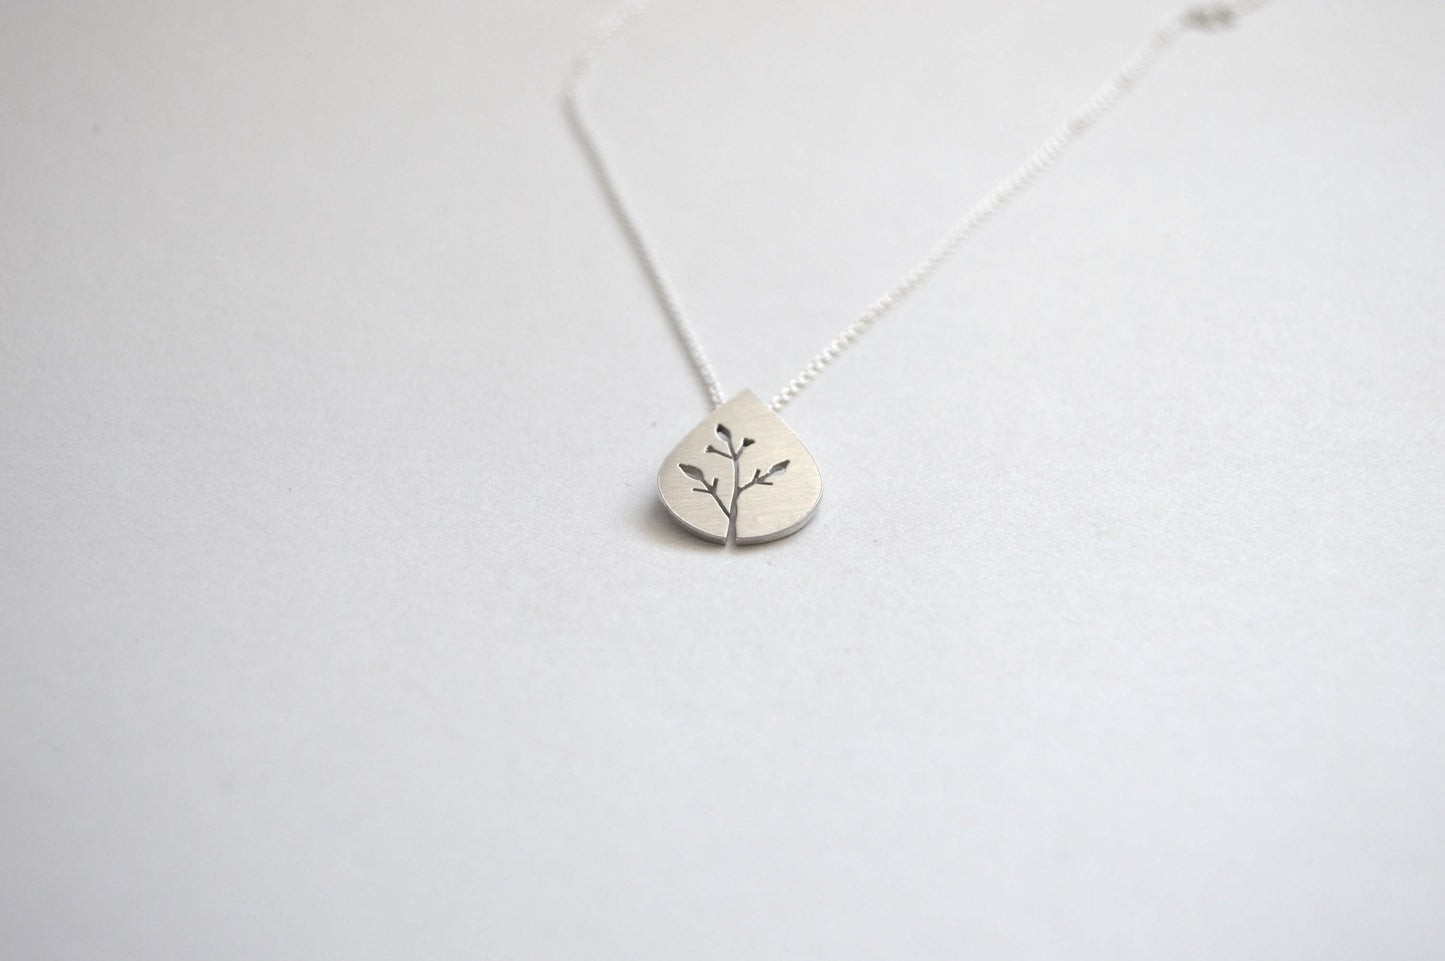  Botanical Collection Teardrop Pendant with Botanical cut-out design